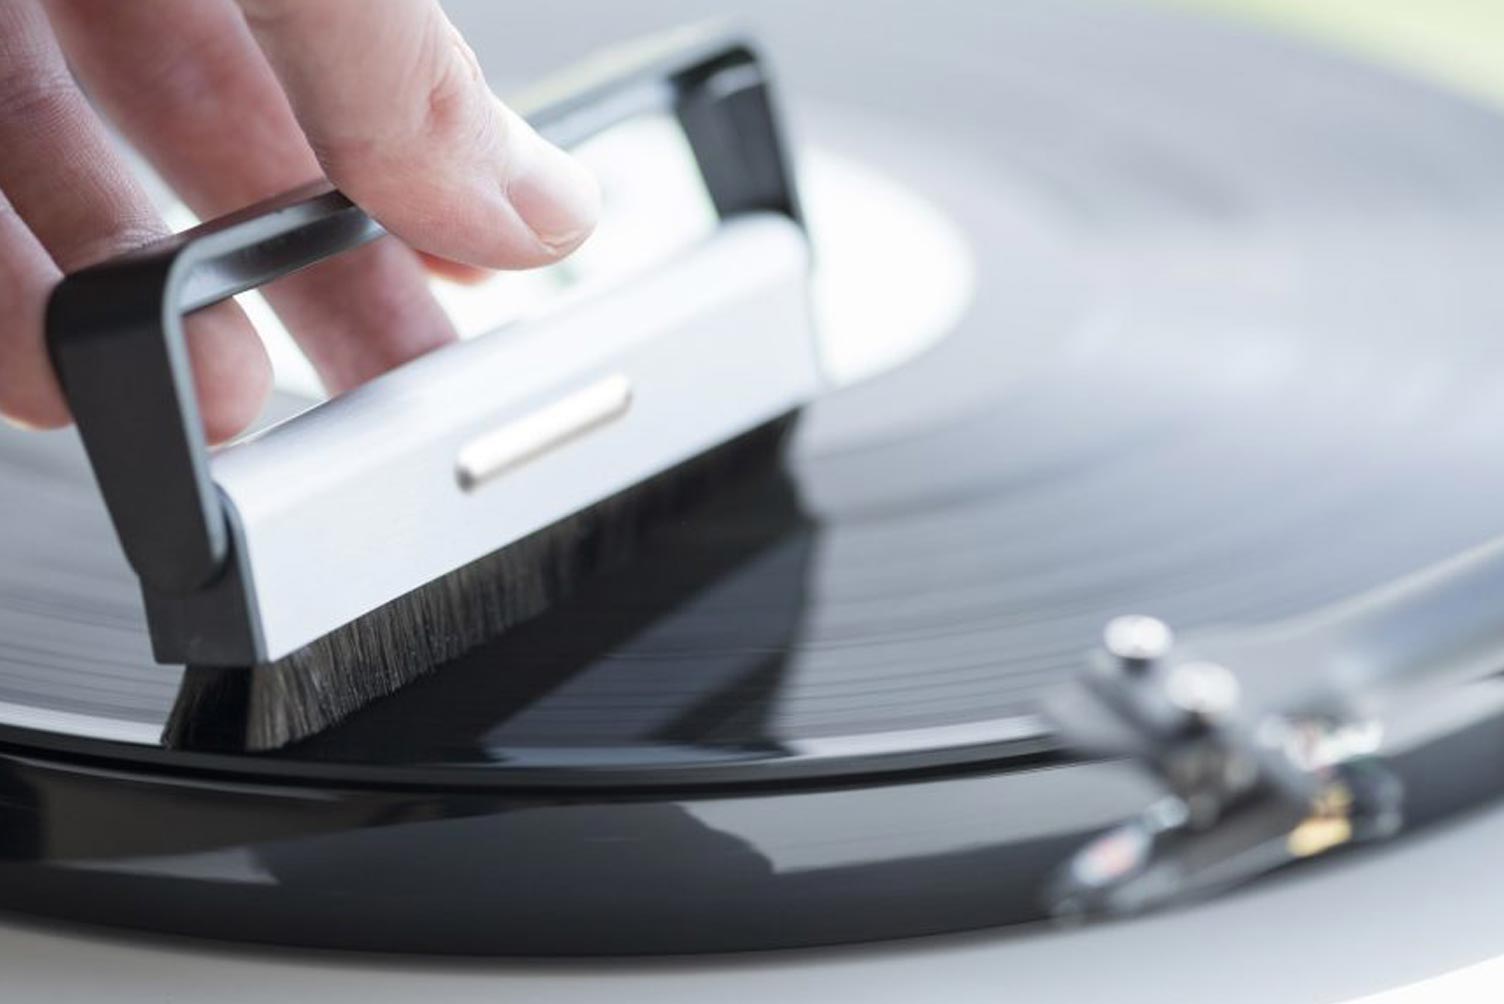 This new ultrasonic record cleaner cleans and dries your vinyl with  soundwaves